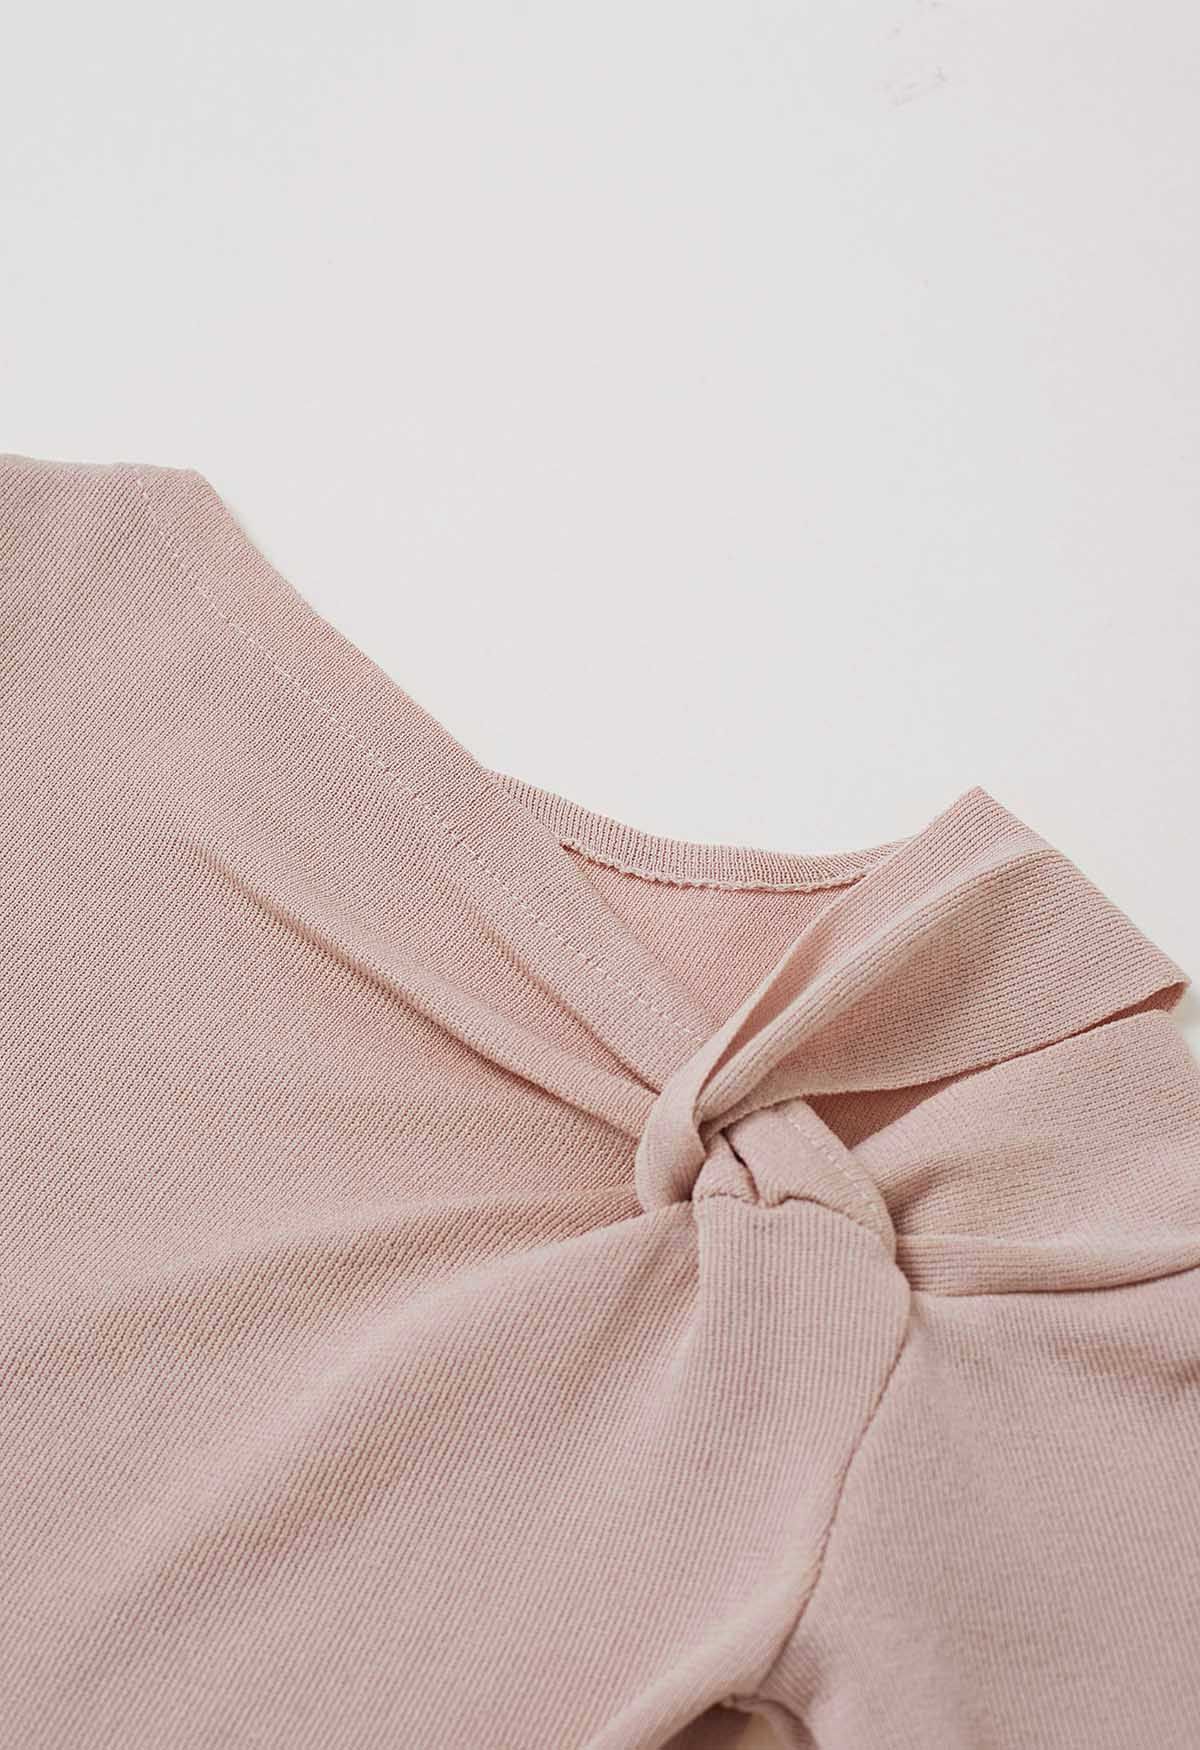 Stylish Knotted Shoulder Stretchy Knit Top in Pink